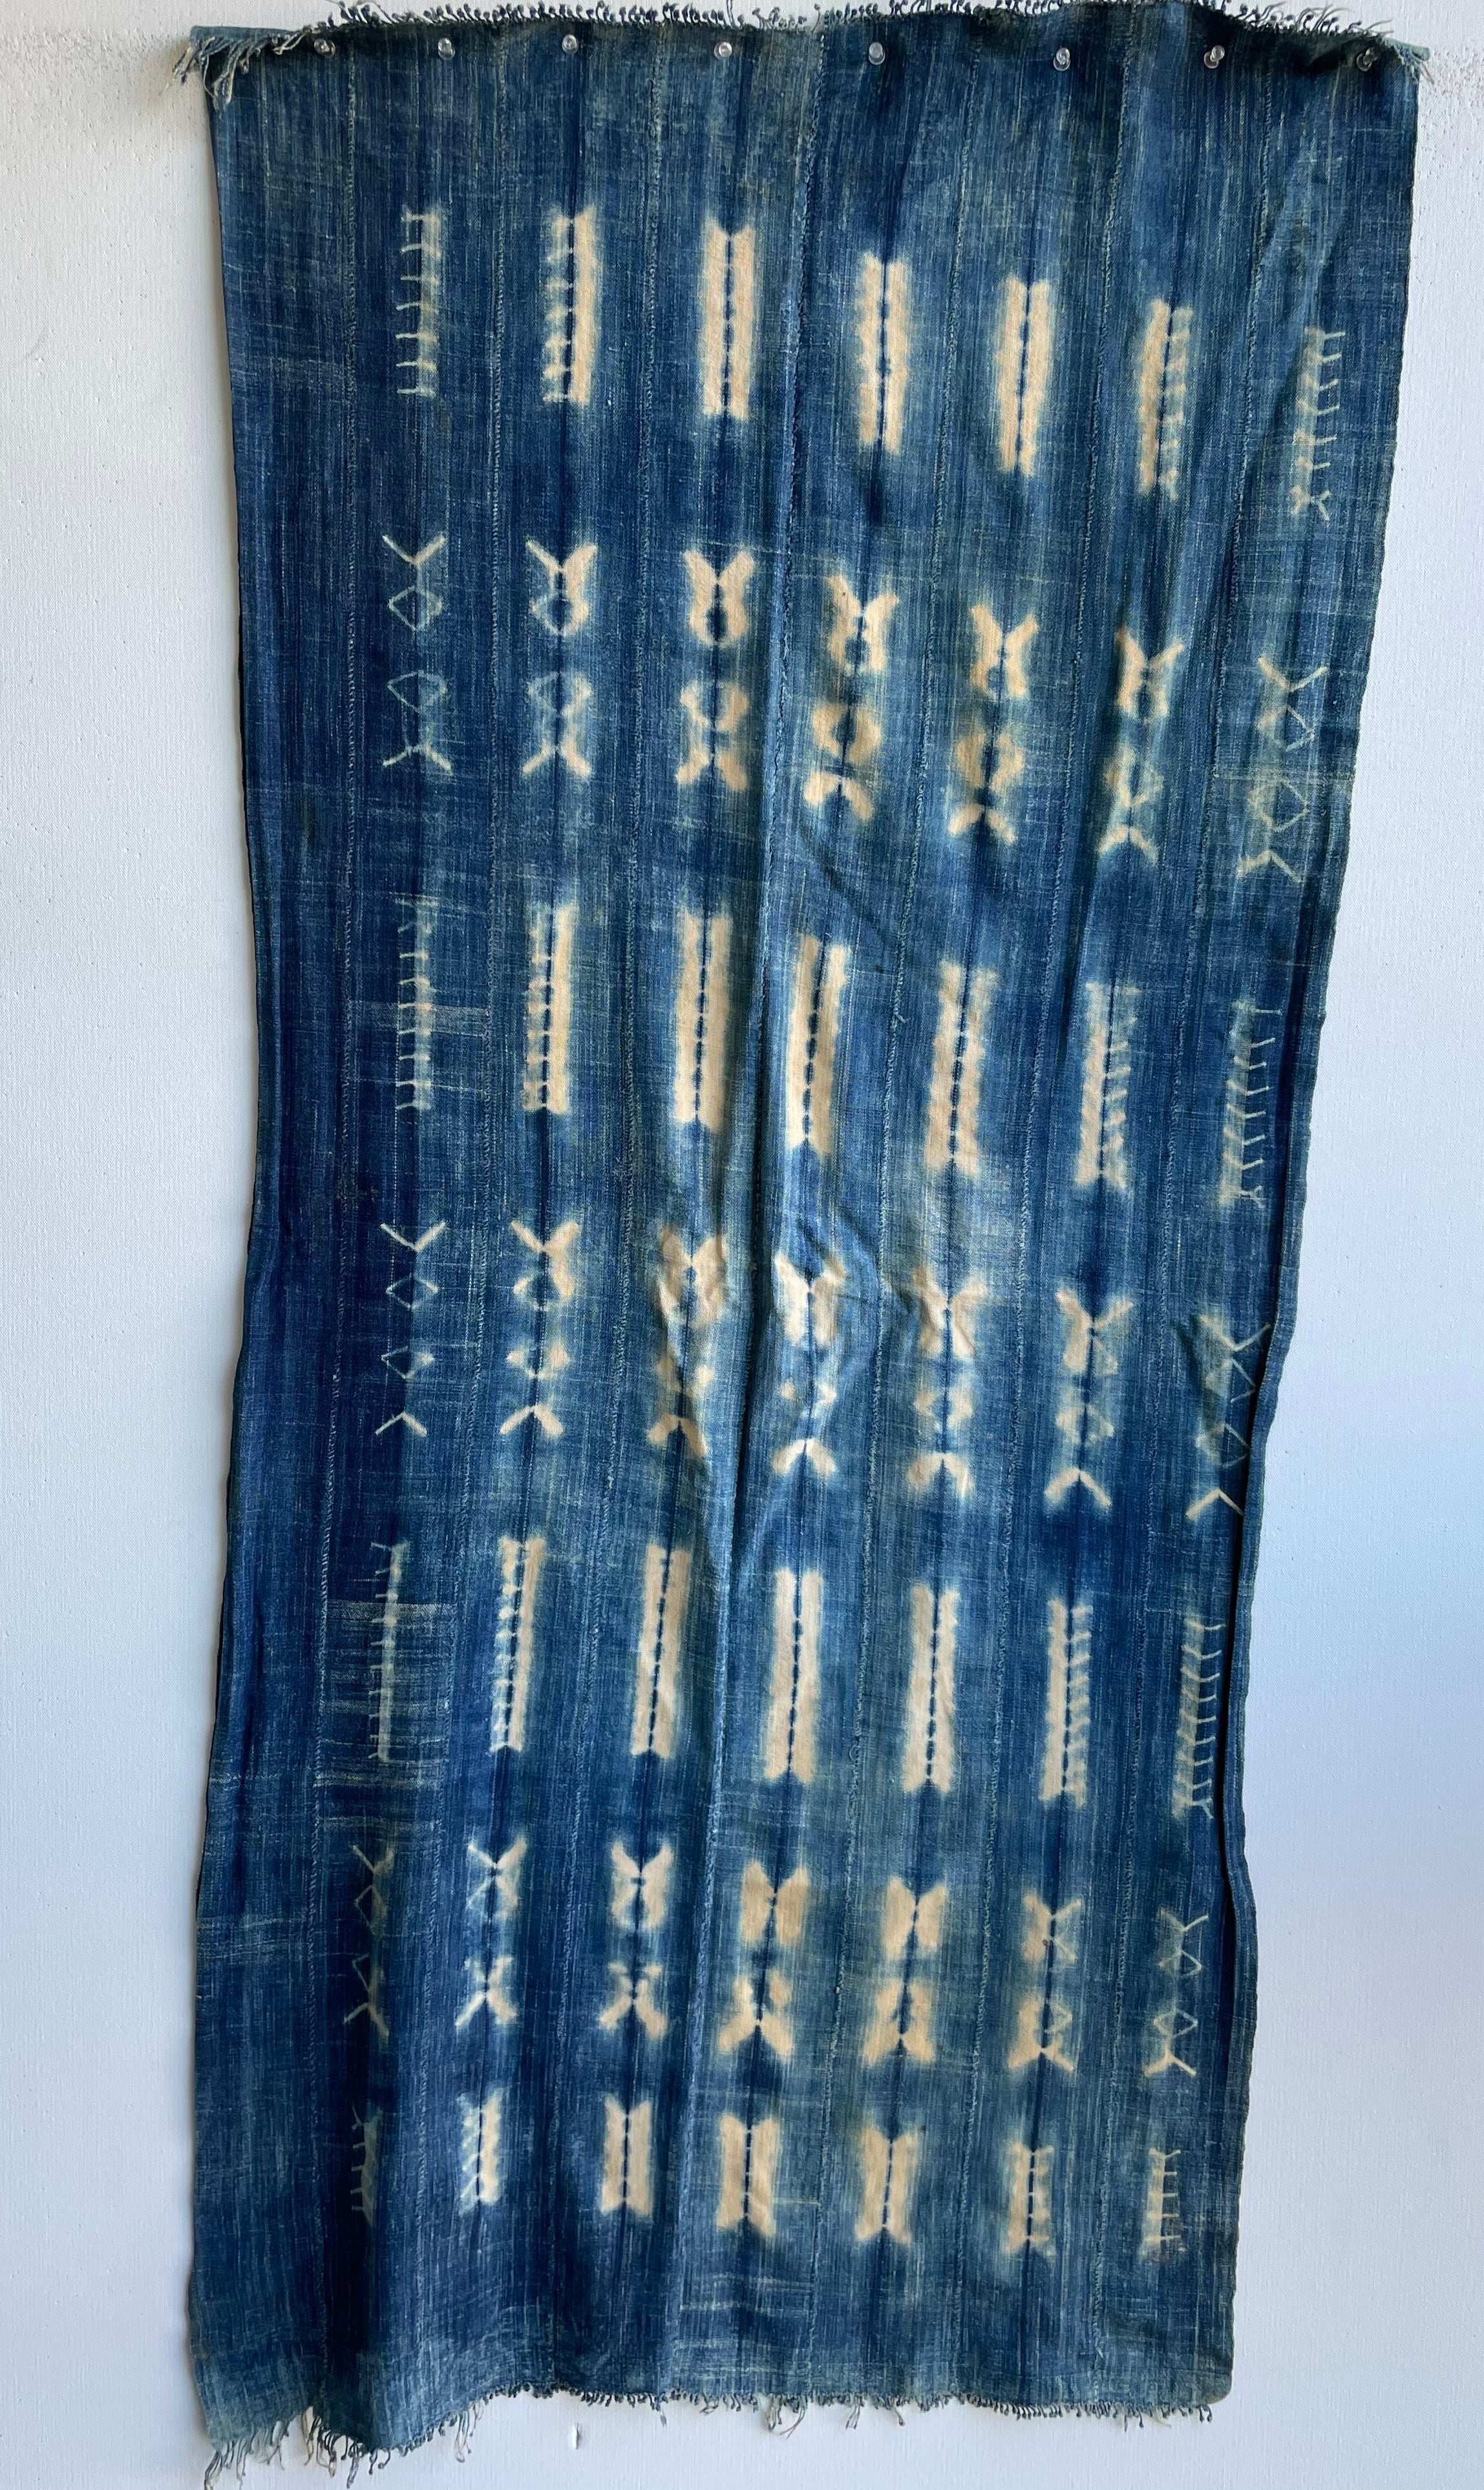 Handcrafted African Art - Scarves Shawls - Tie Dyed  Indigo - Faded Blue - Vintage - Textiles Fabric